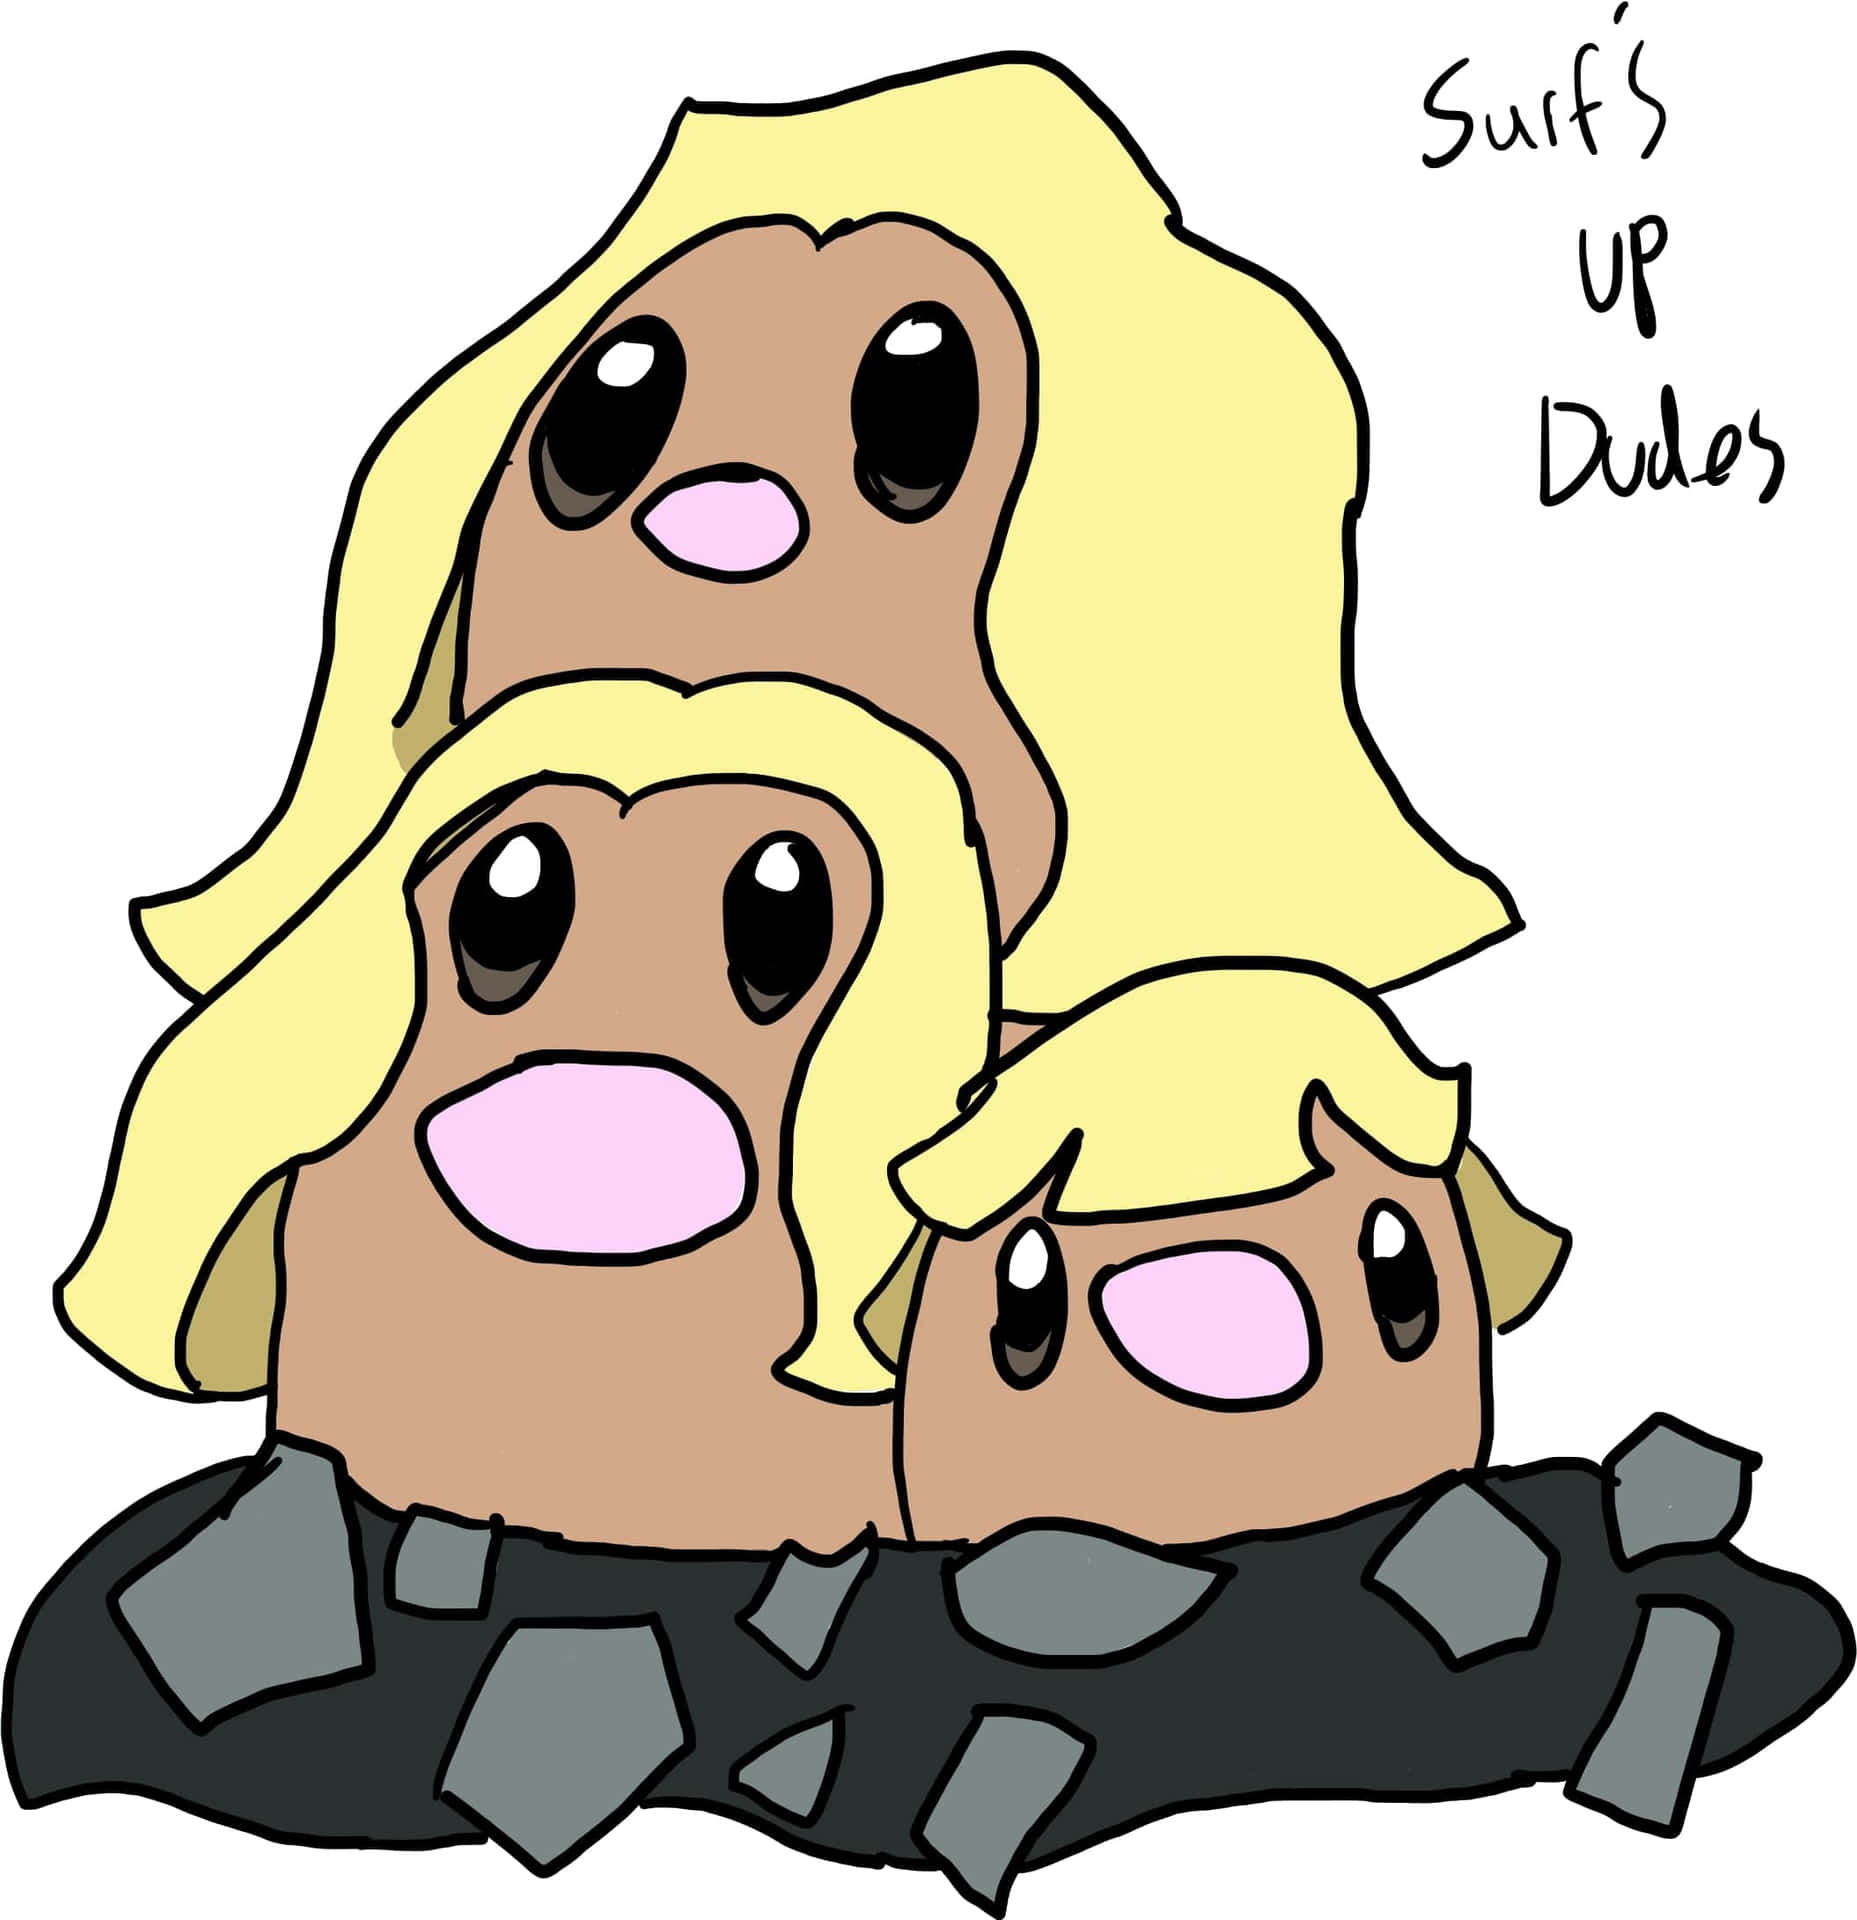 Dugtrio,surfa Upp, Du! (this Could Be A Possible Translation For A Computer Or Mobile Wallpaper With A Surfing-themed Dugtrio Design.) Wallpaper